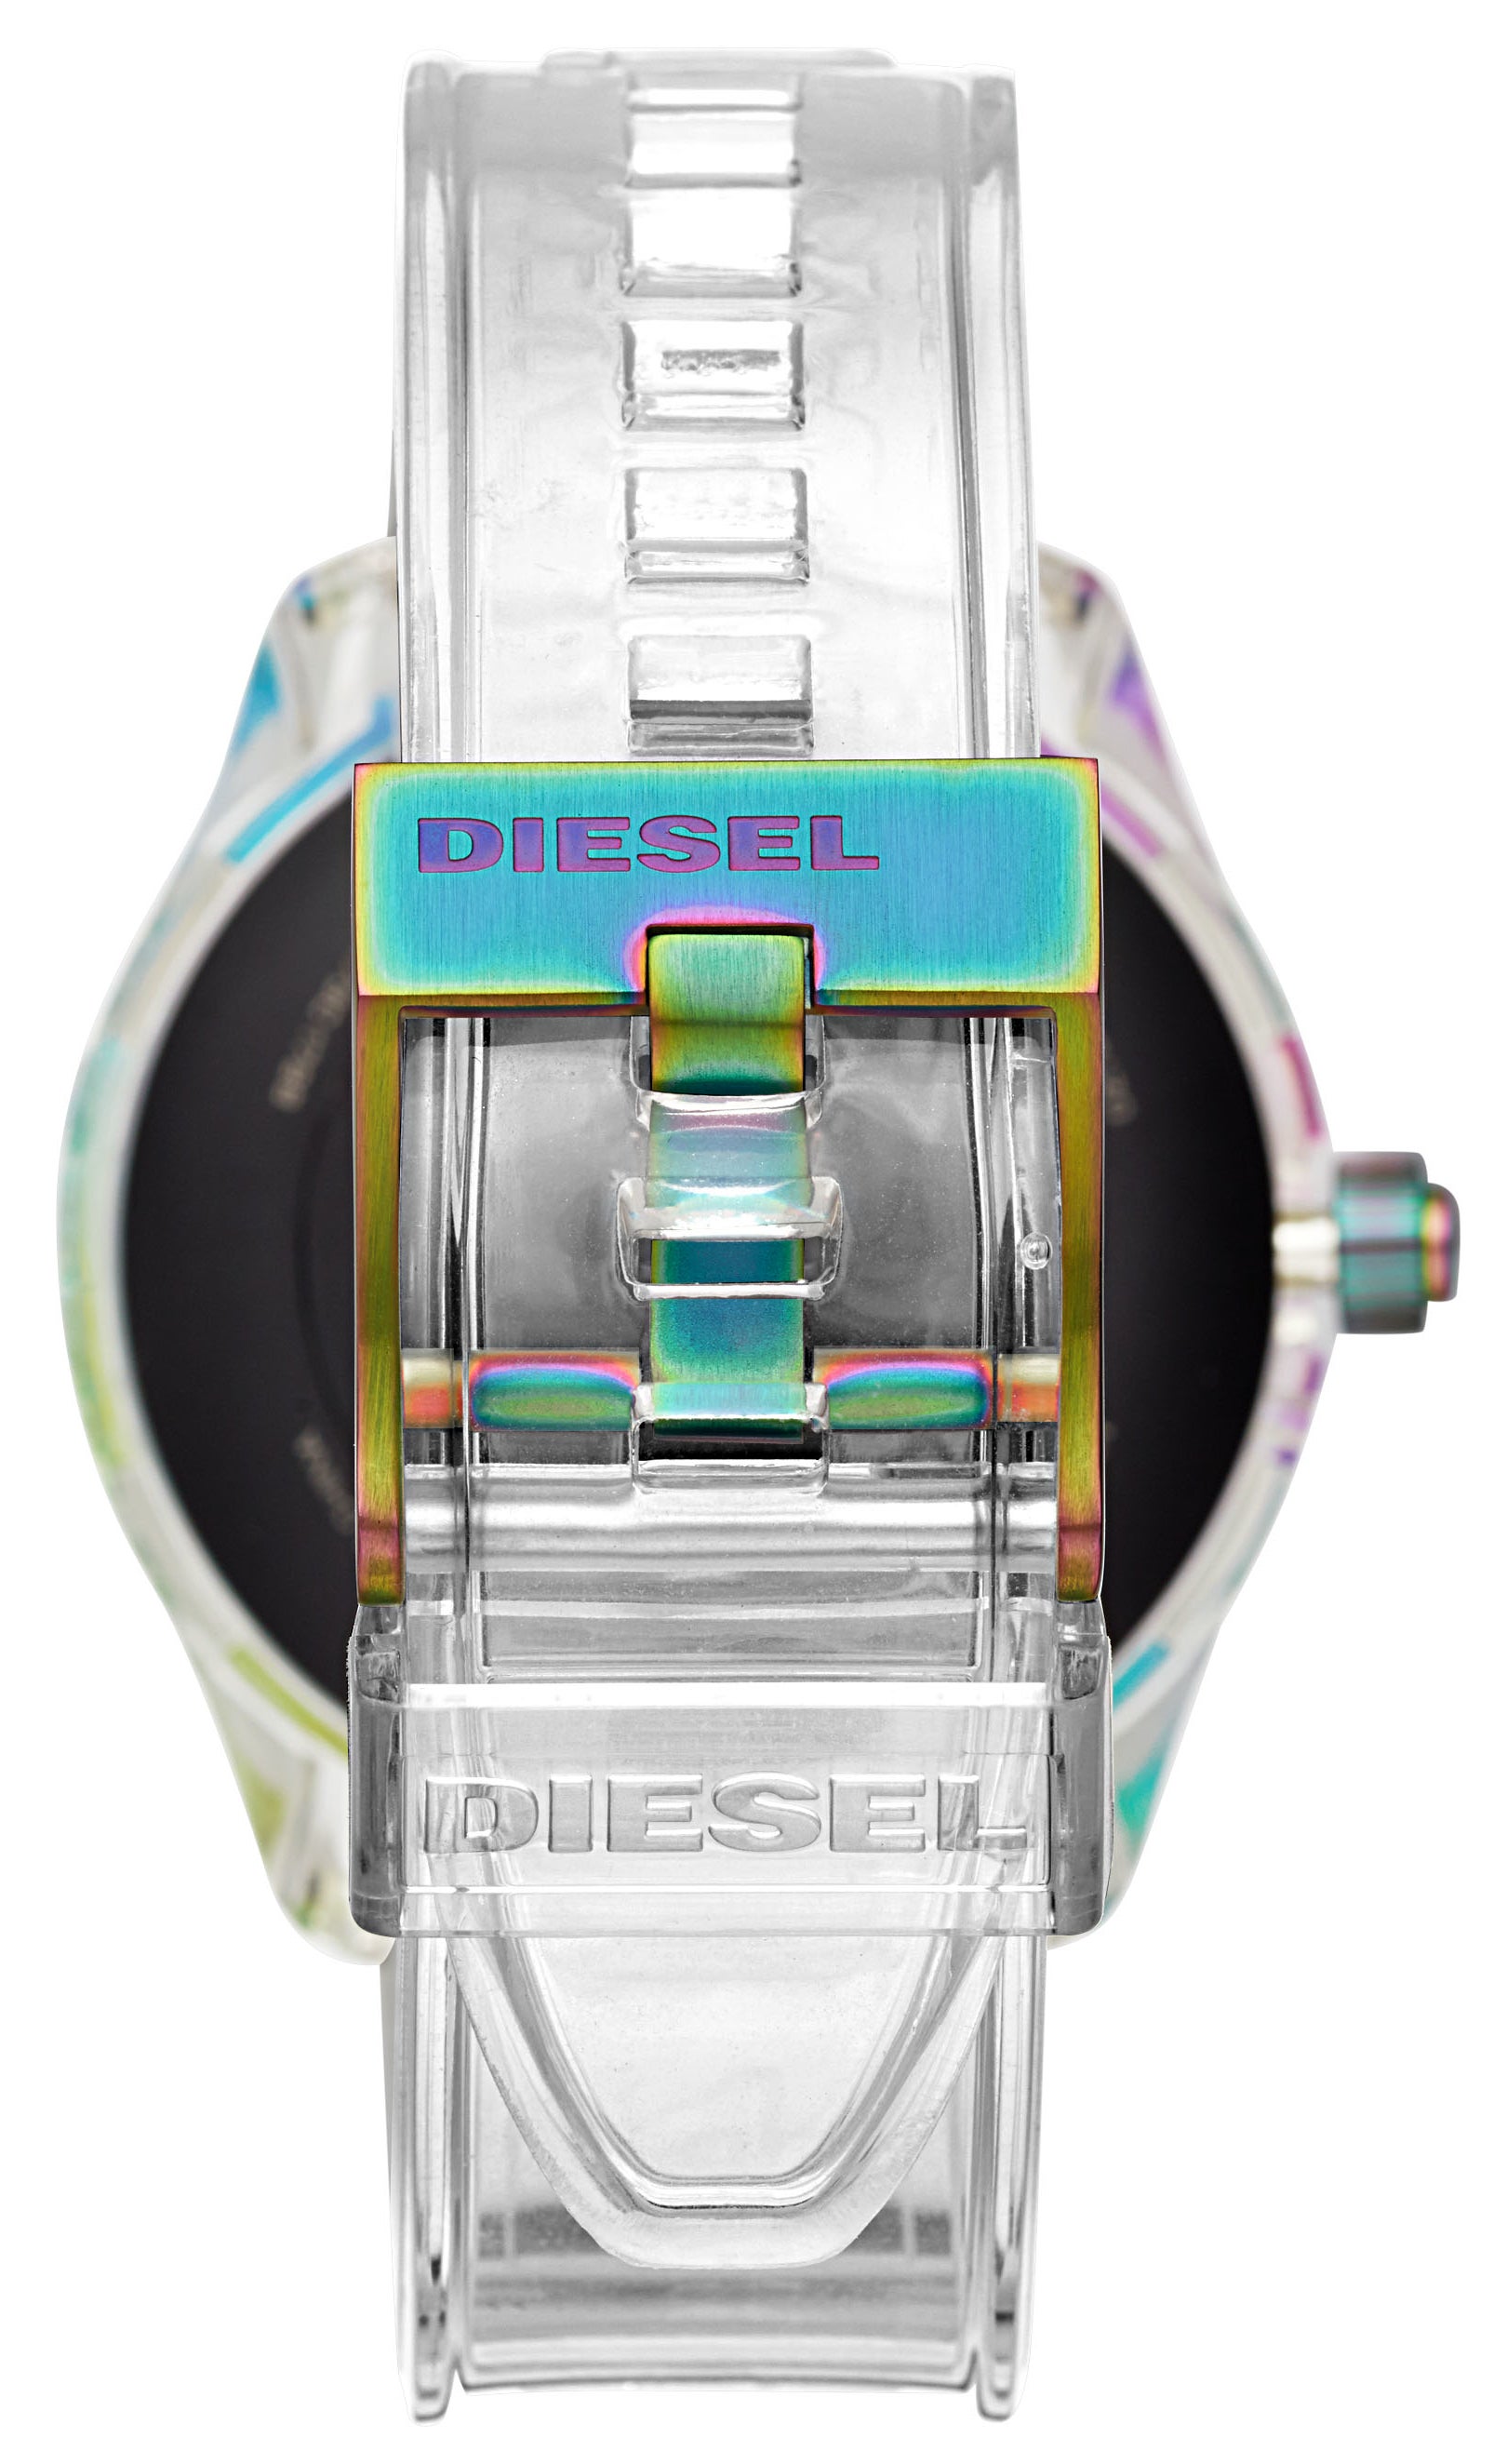 Fossil finally launches the Diesel Fadelite smartwatch revealed at CES 2020